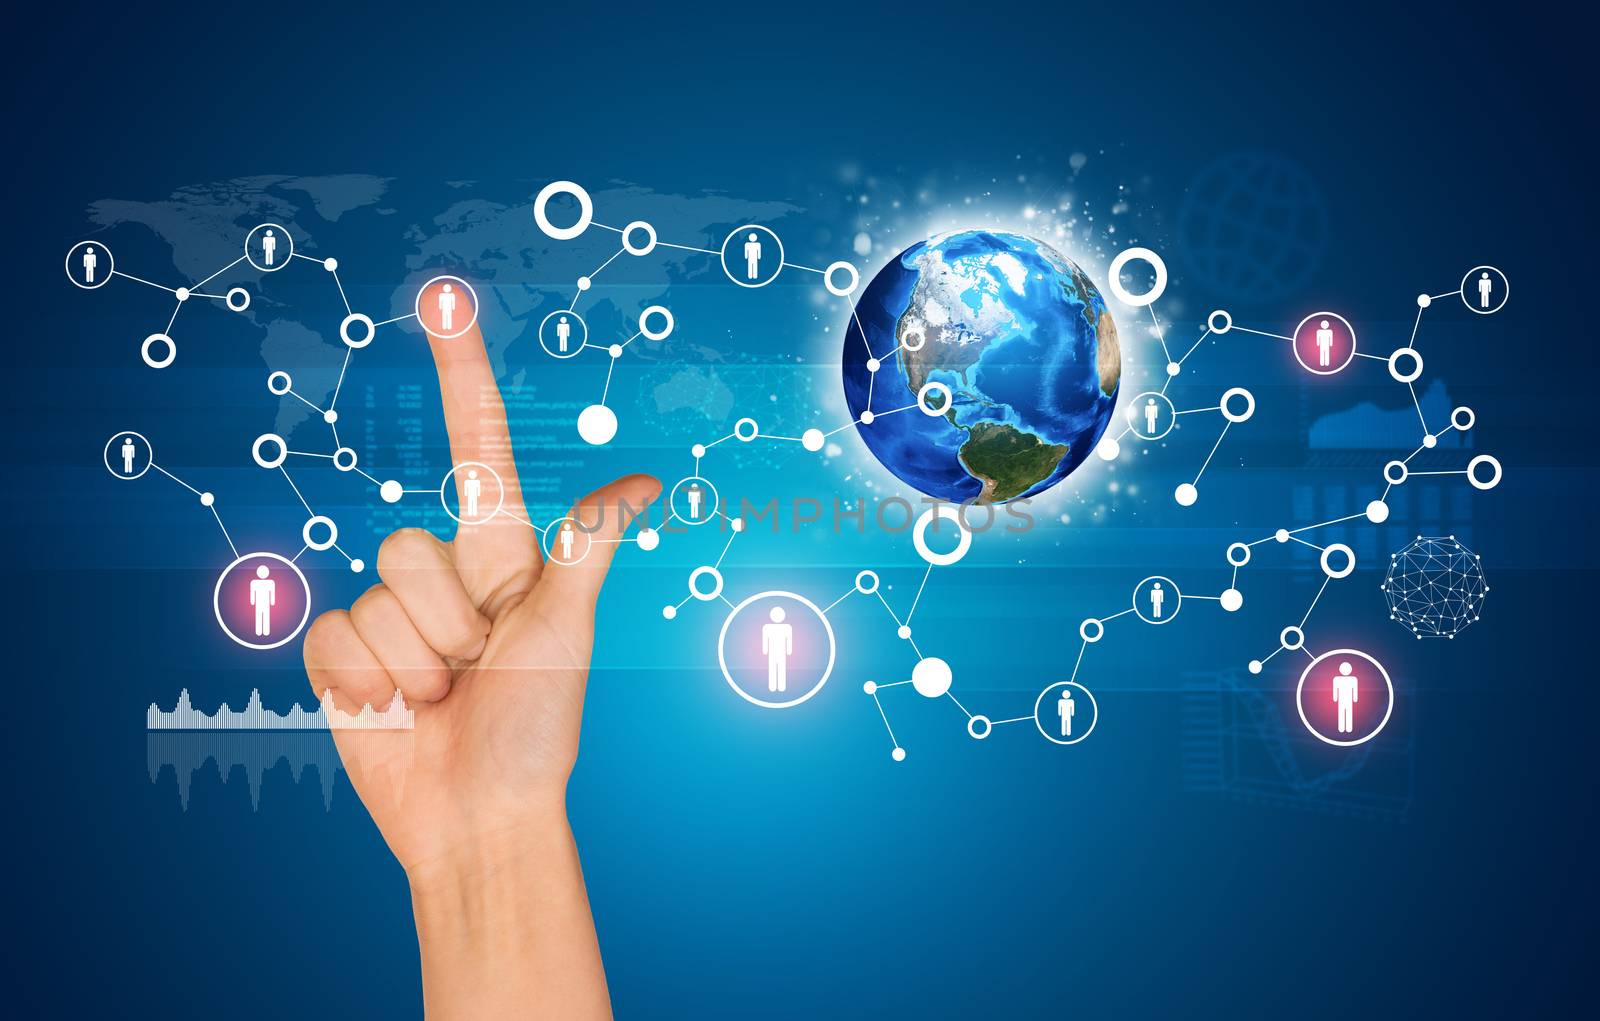 Communication in global computer networks within pointer finger of right hand touching screen. Elements of this image furnished by NASA